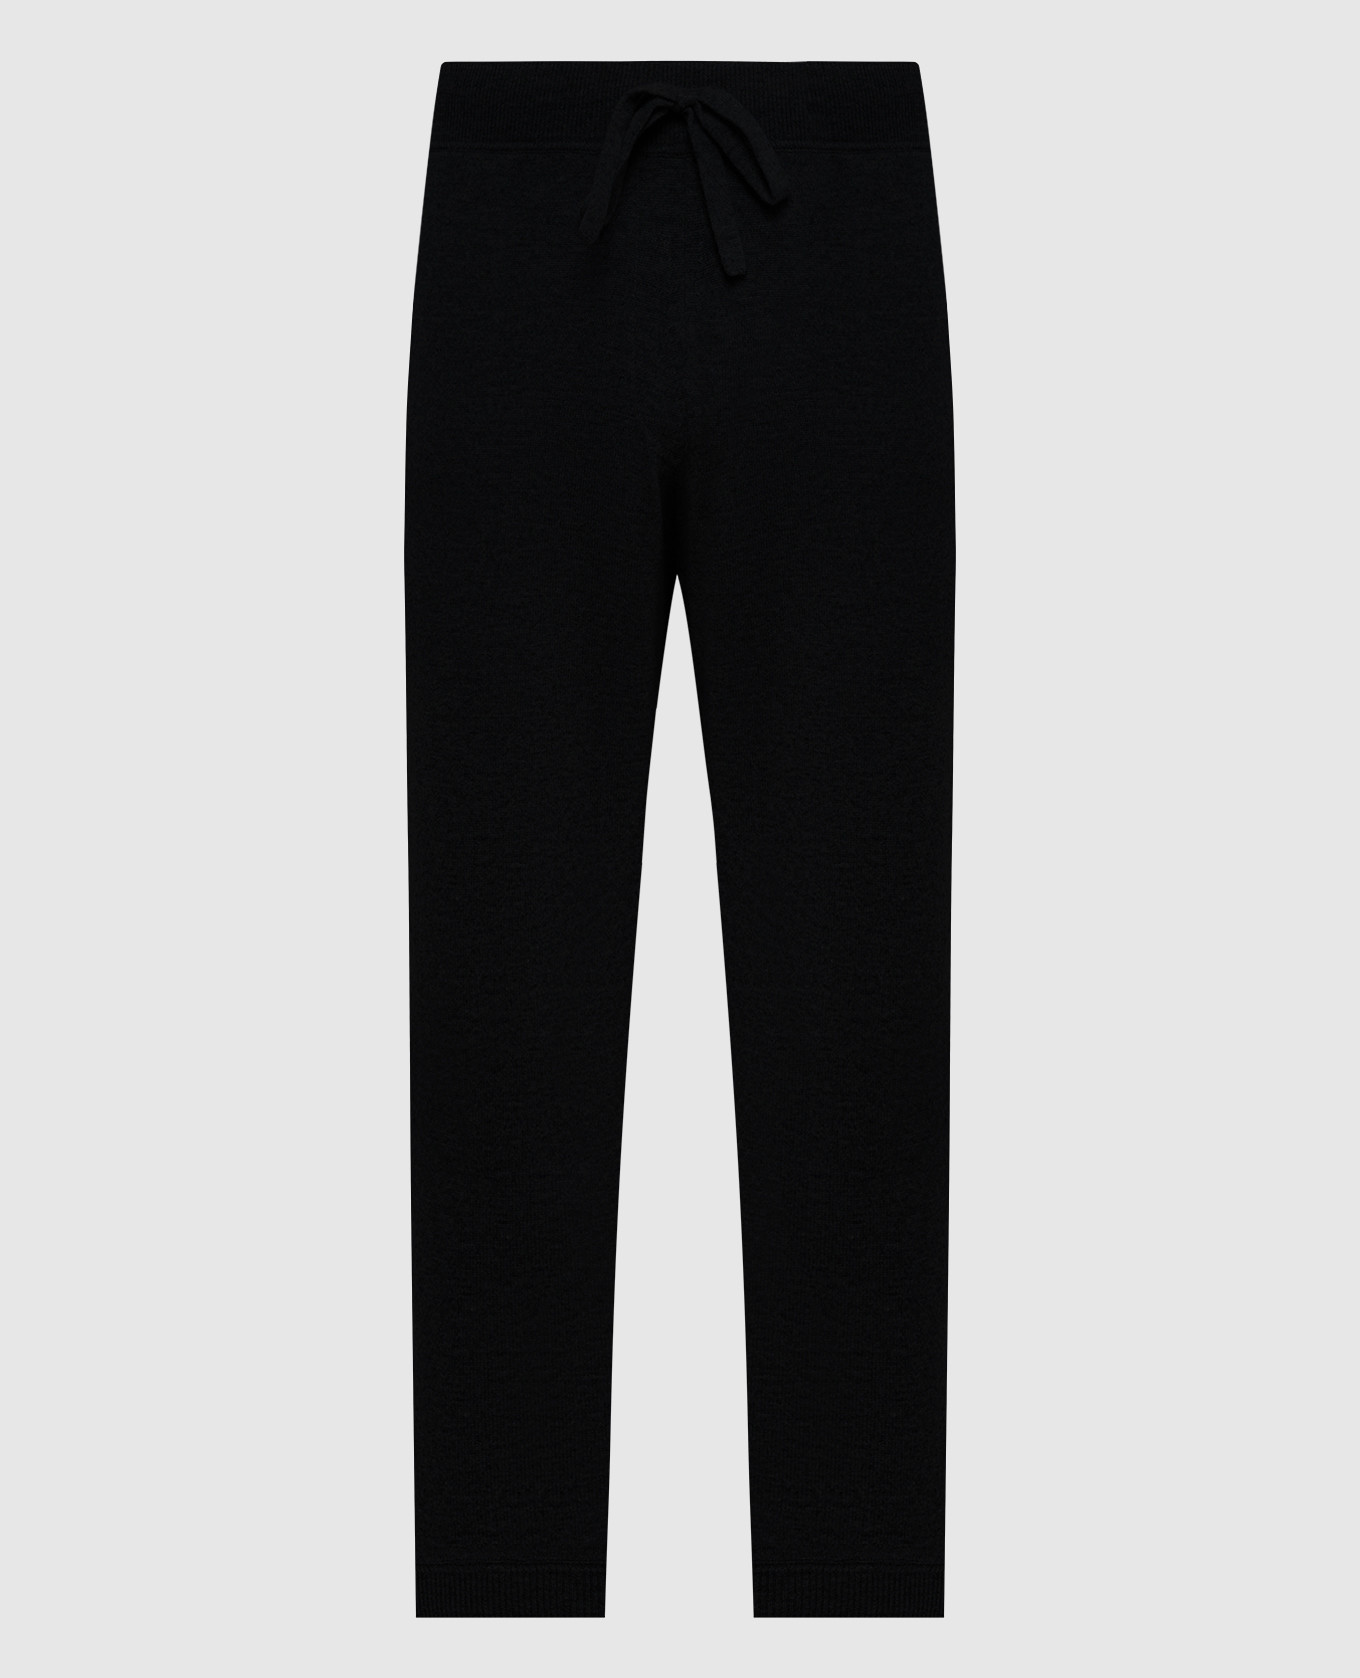 Black wool and cashmere joggers